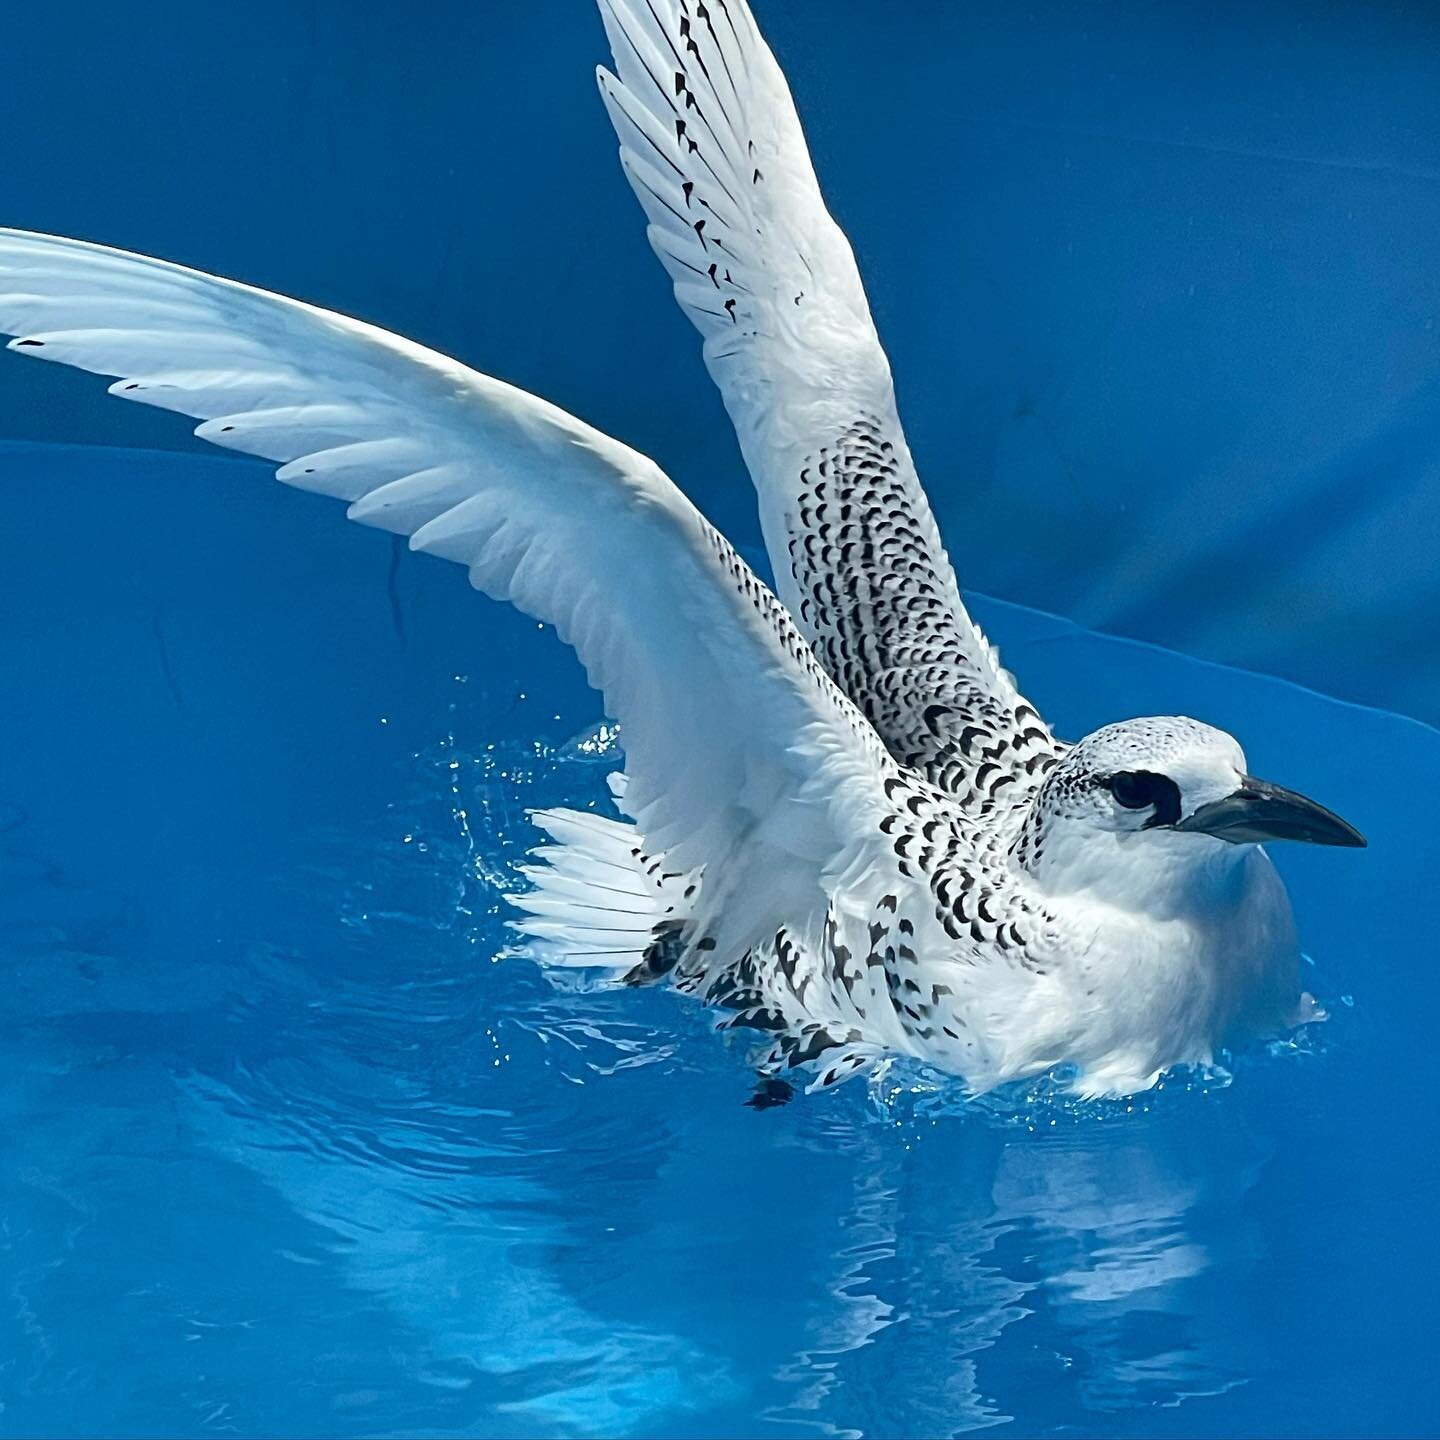 There has been lots of stretching, flapping, preening, and bathing happening on our conditioning pool this morning! This young Red-tailed Tropicbird / koa&lsquo;e&lsquo;ula has been getting his/her feathers waterproof and ready to fly for the last se